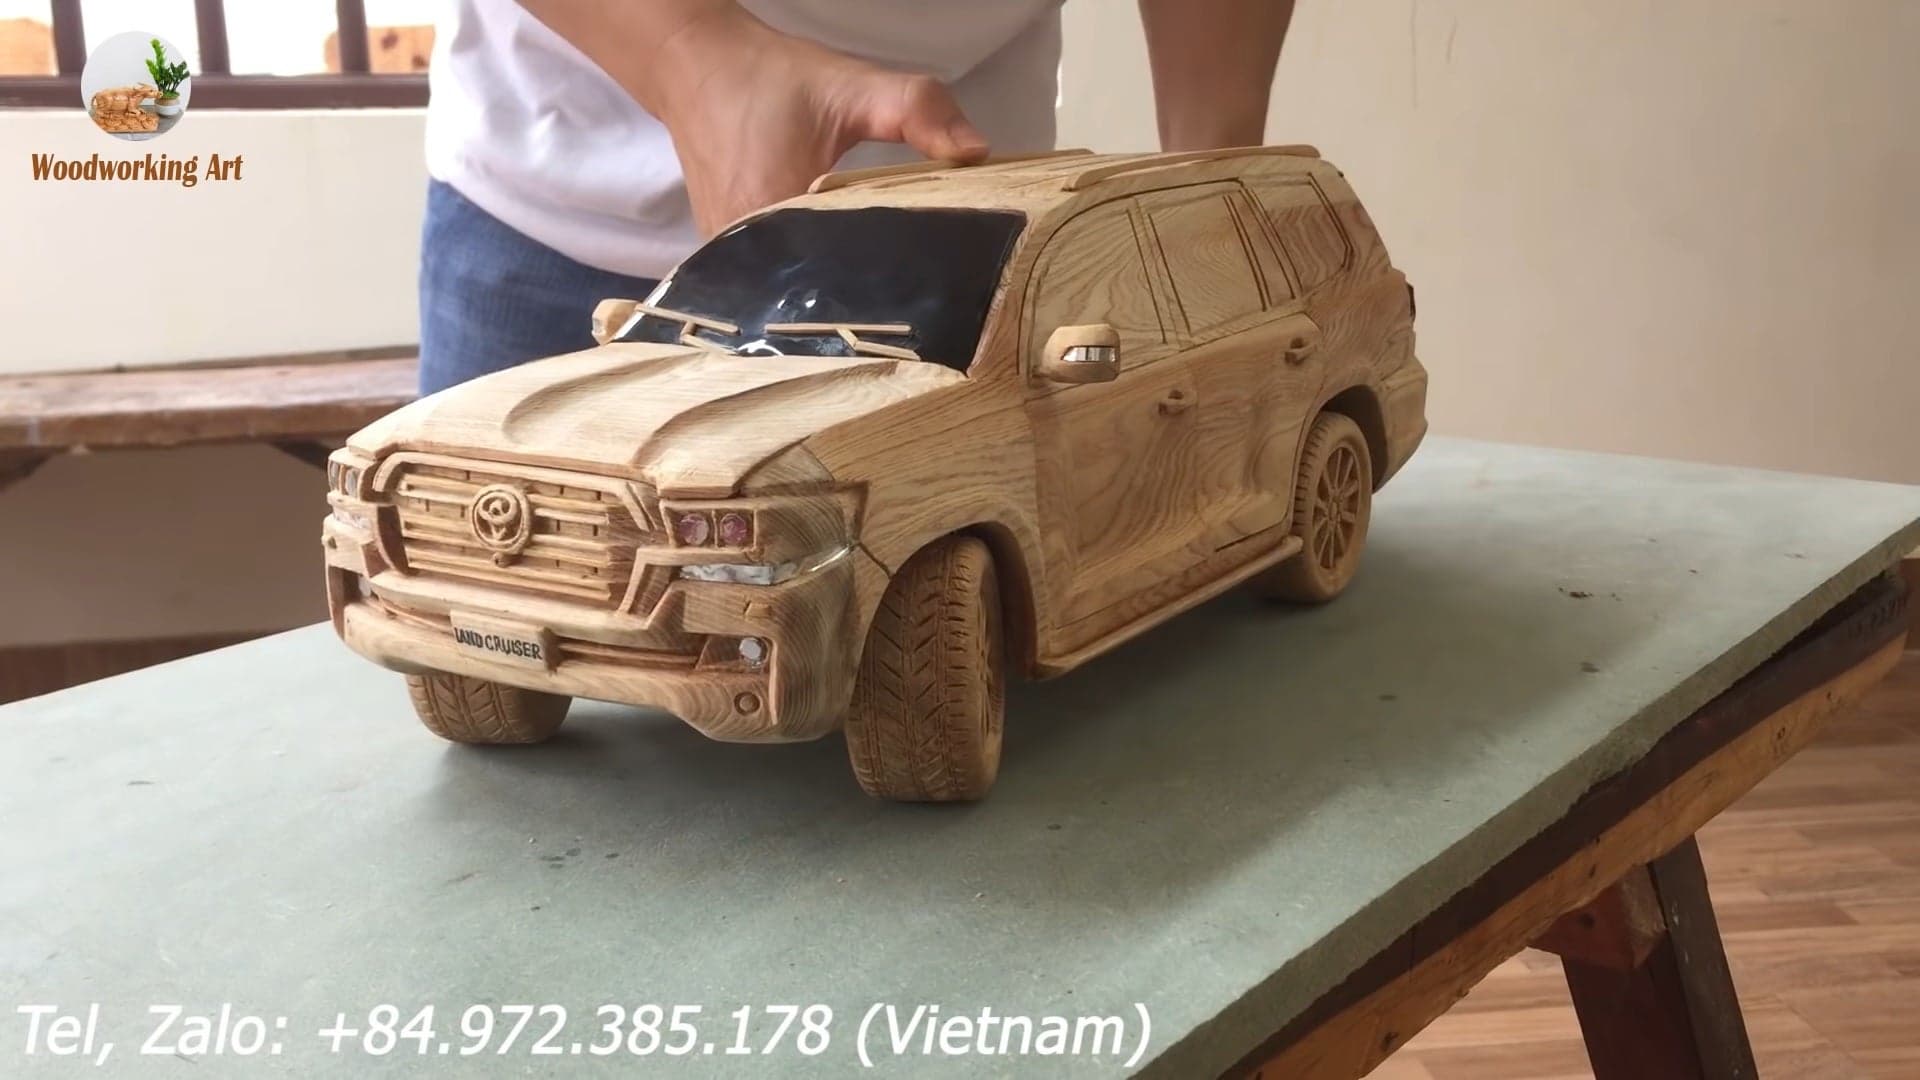 Watch This Wizard Carve an Exquisite Toyota Land Cruiser Out of Wood